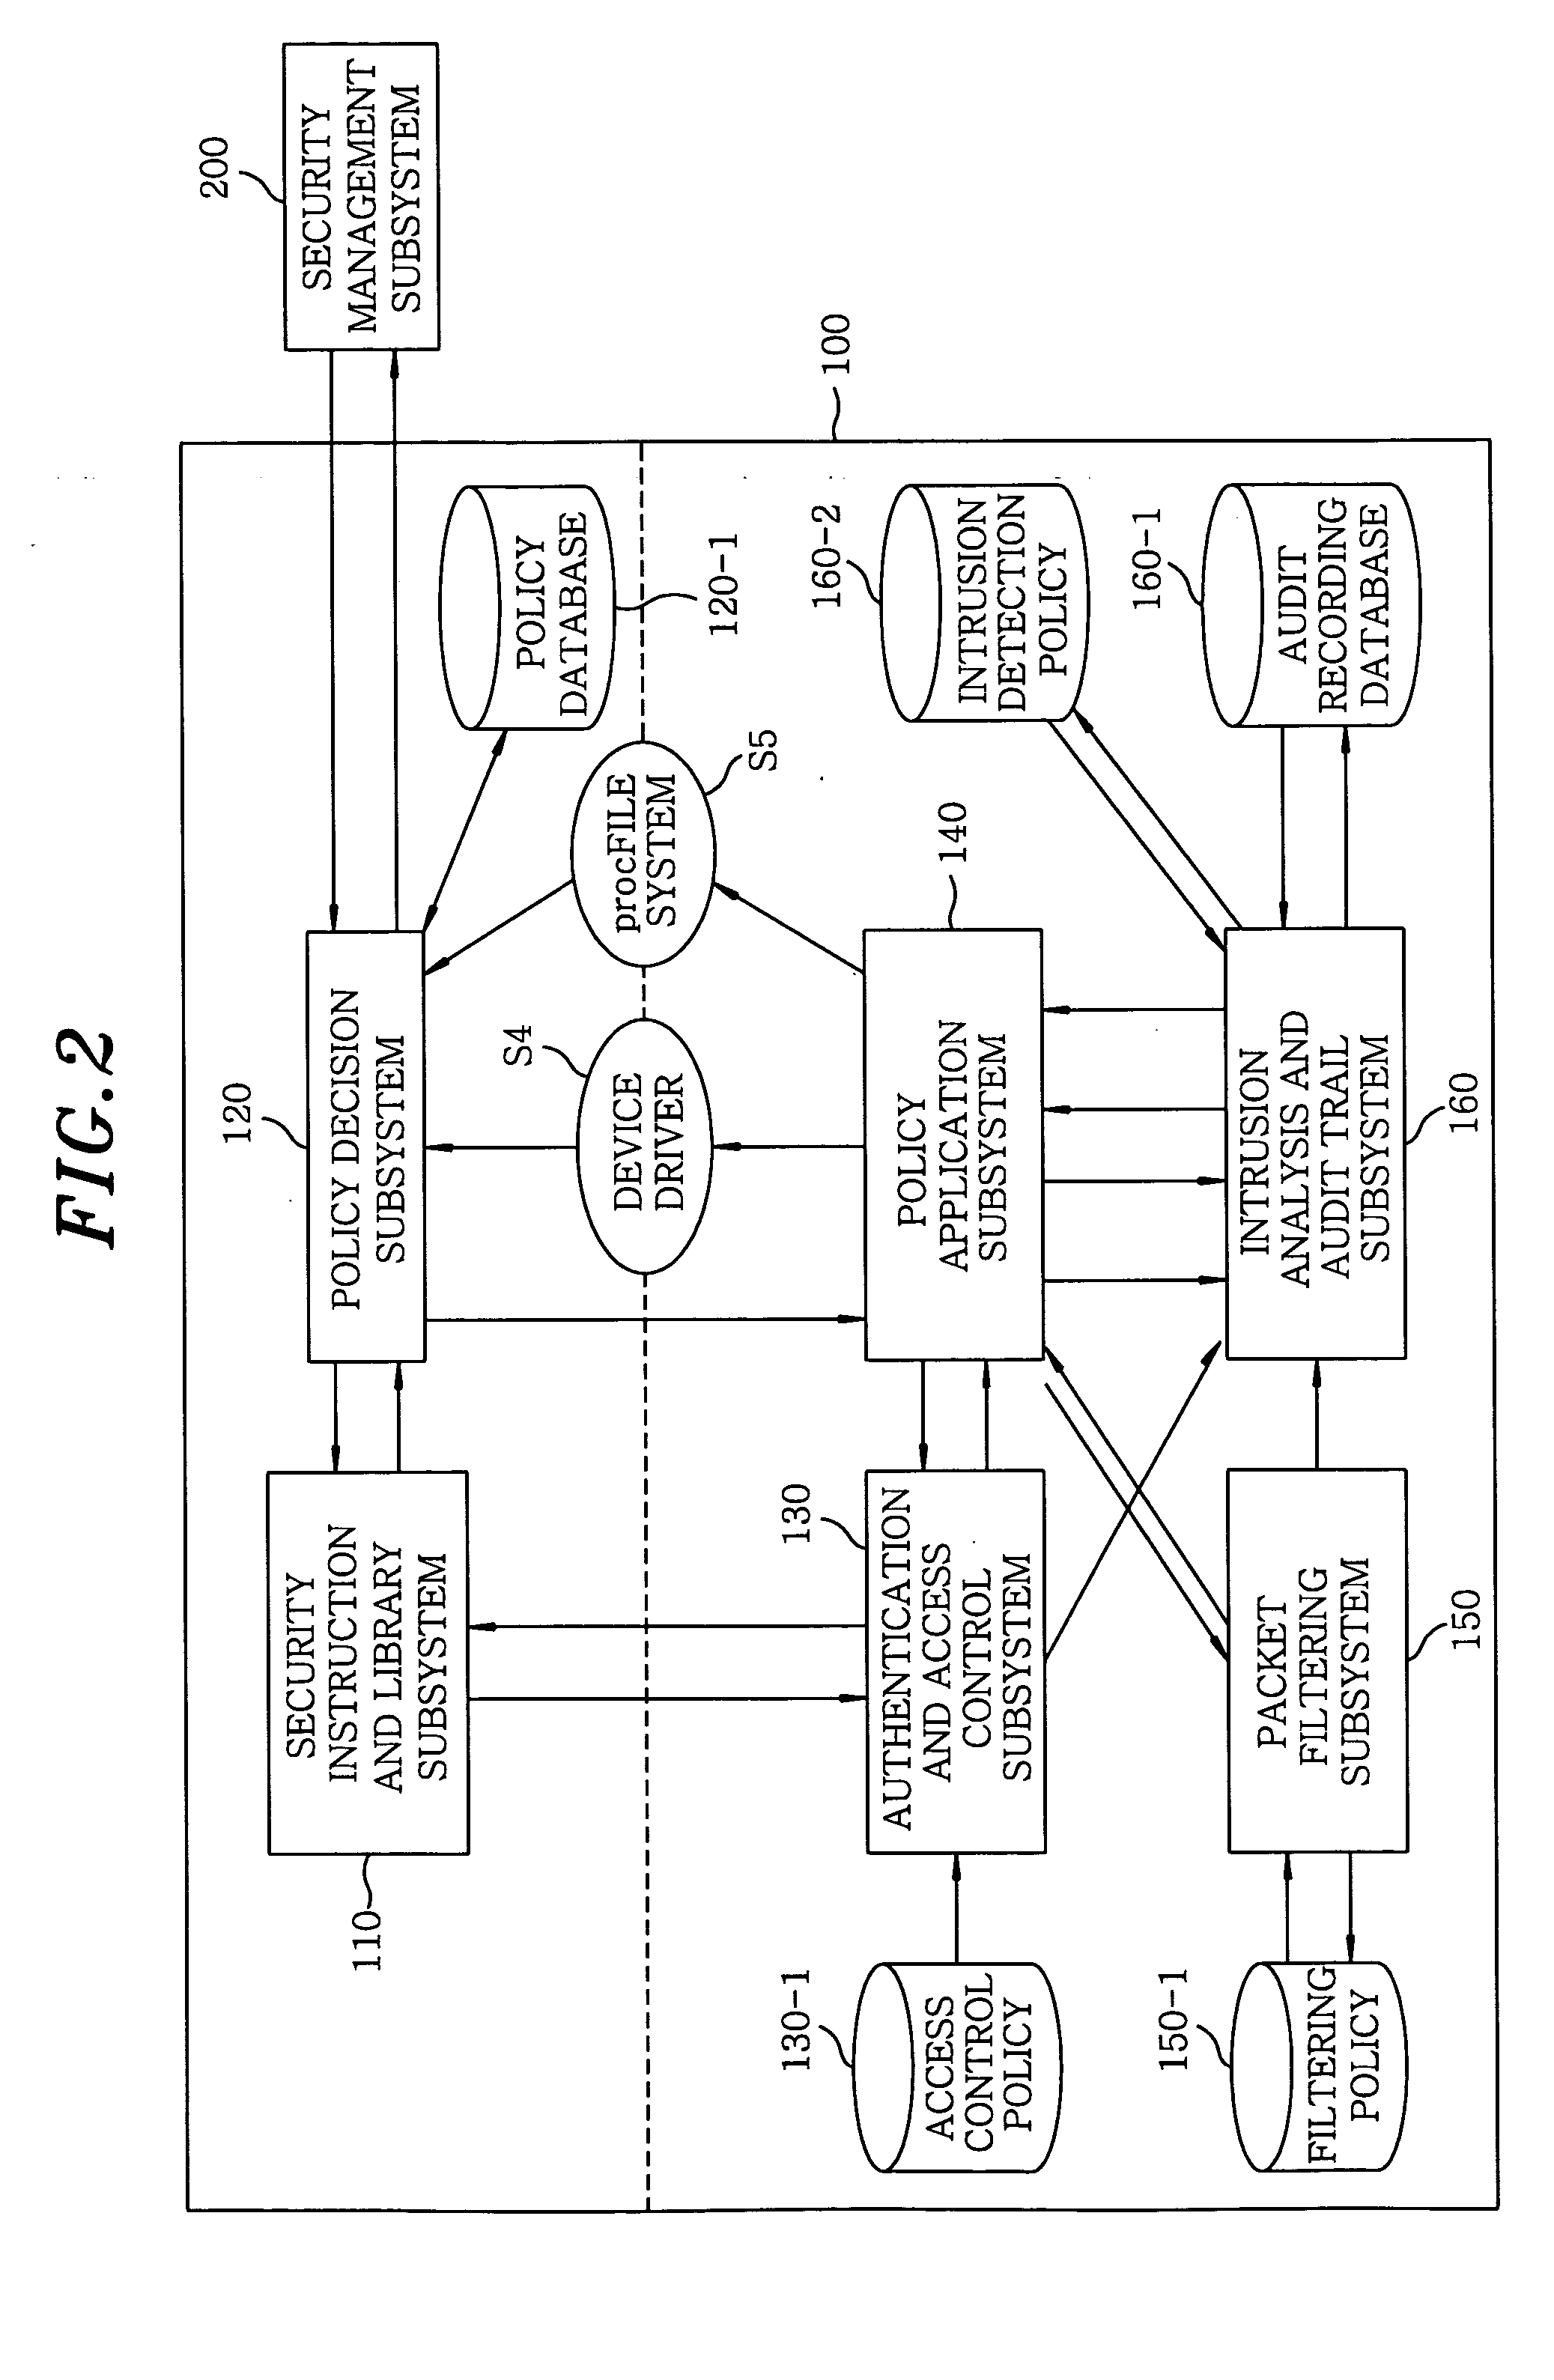 Method and apparatus for security engine management in network nodes